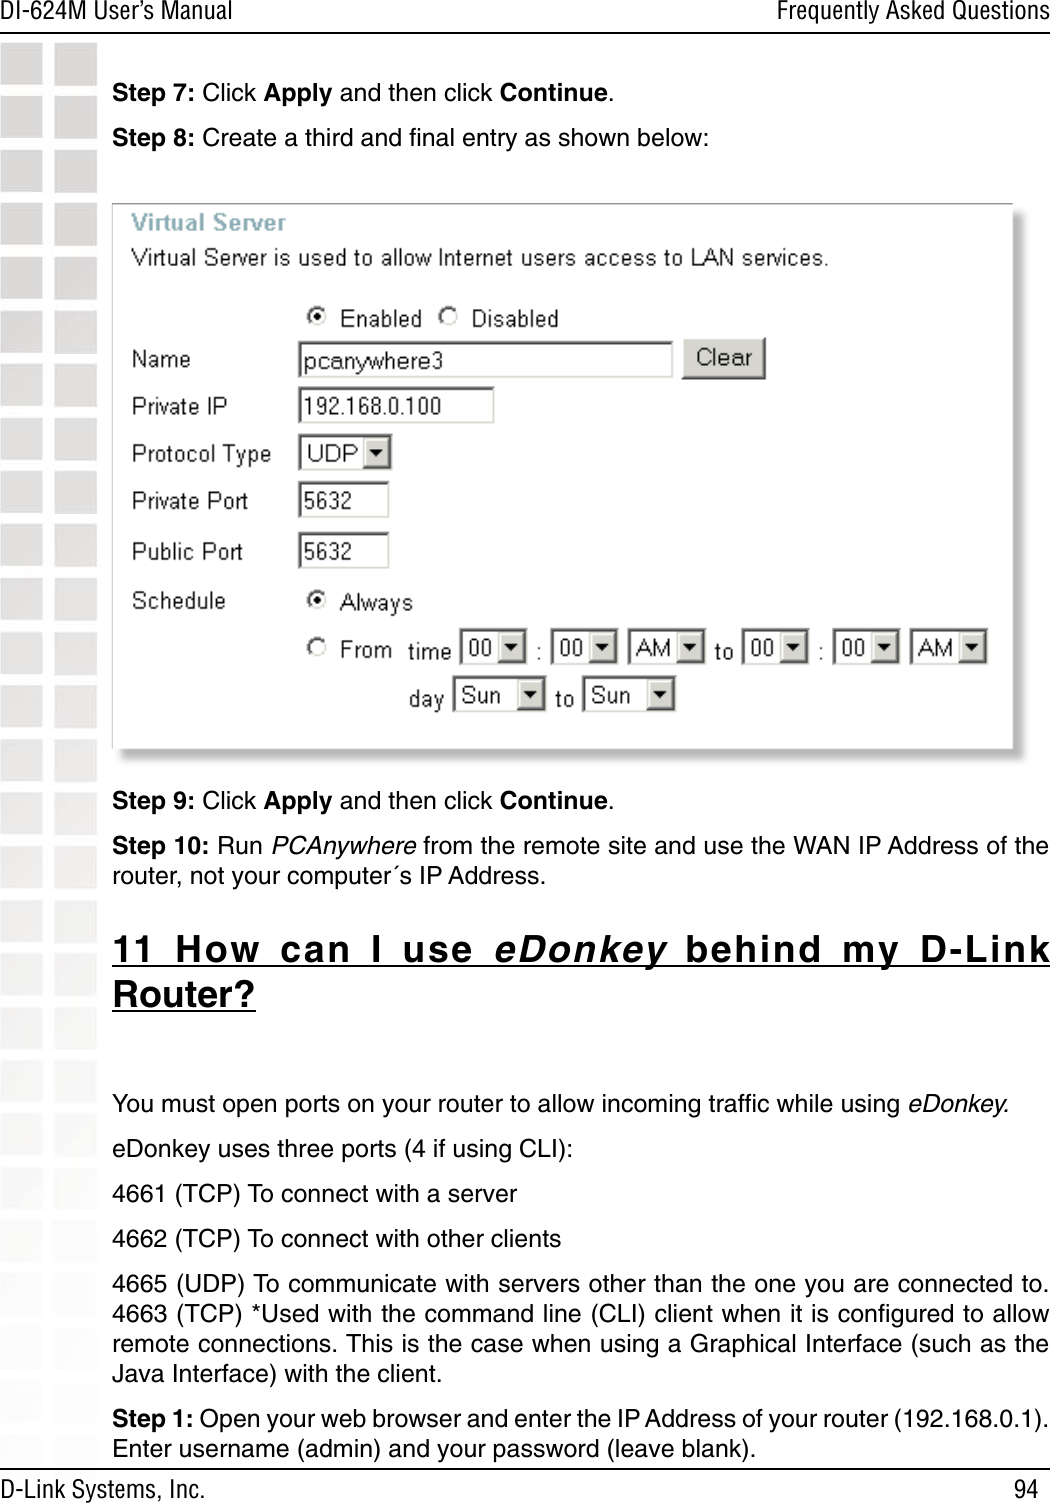 94DI-624M User’s Manual D-Link Systems, Inc.Frequently Asked QuestionsStep 7: Click Apply and then click Continue. Step 8: Create a third and ﬁnal entry as shown below: Step 9: Click Apply and then click Continue. Step 10: Run PCAnywhere from the remote site and use the WAN IP Address of the router, not your computer´s IP Address. 11  How  can  I  use  eDonkey  behind  my  D-Link Router?You must open ports on your router to allow incoming trafﬁc while using eDonkey.eDonkey uses three ports (4 if using CLI): 4661 (TCP) To connect with a server 4662 (TCP) To connect with other clients 4665 (UDP) To communicate with servers other than the one you are connected to. 4663 (TCP) *Used with the command line (CLI) client when it is conﬁgured to allow remote connections. This is the case when using a Graphical Interface (such as the Java Interface) with the client.Step 1: Open your web browser and enter the IP Address of your router (192.168.0.1). Enter username (admin) and your password (leave blank).  